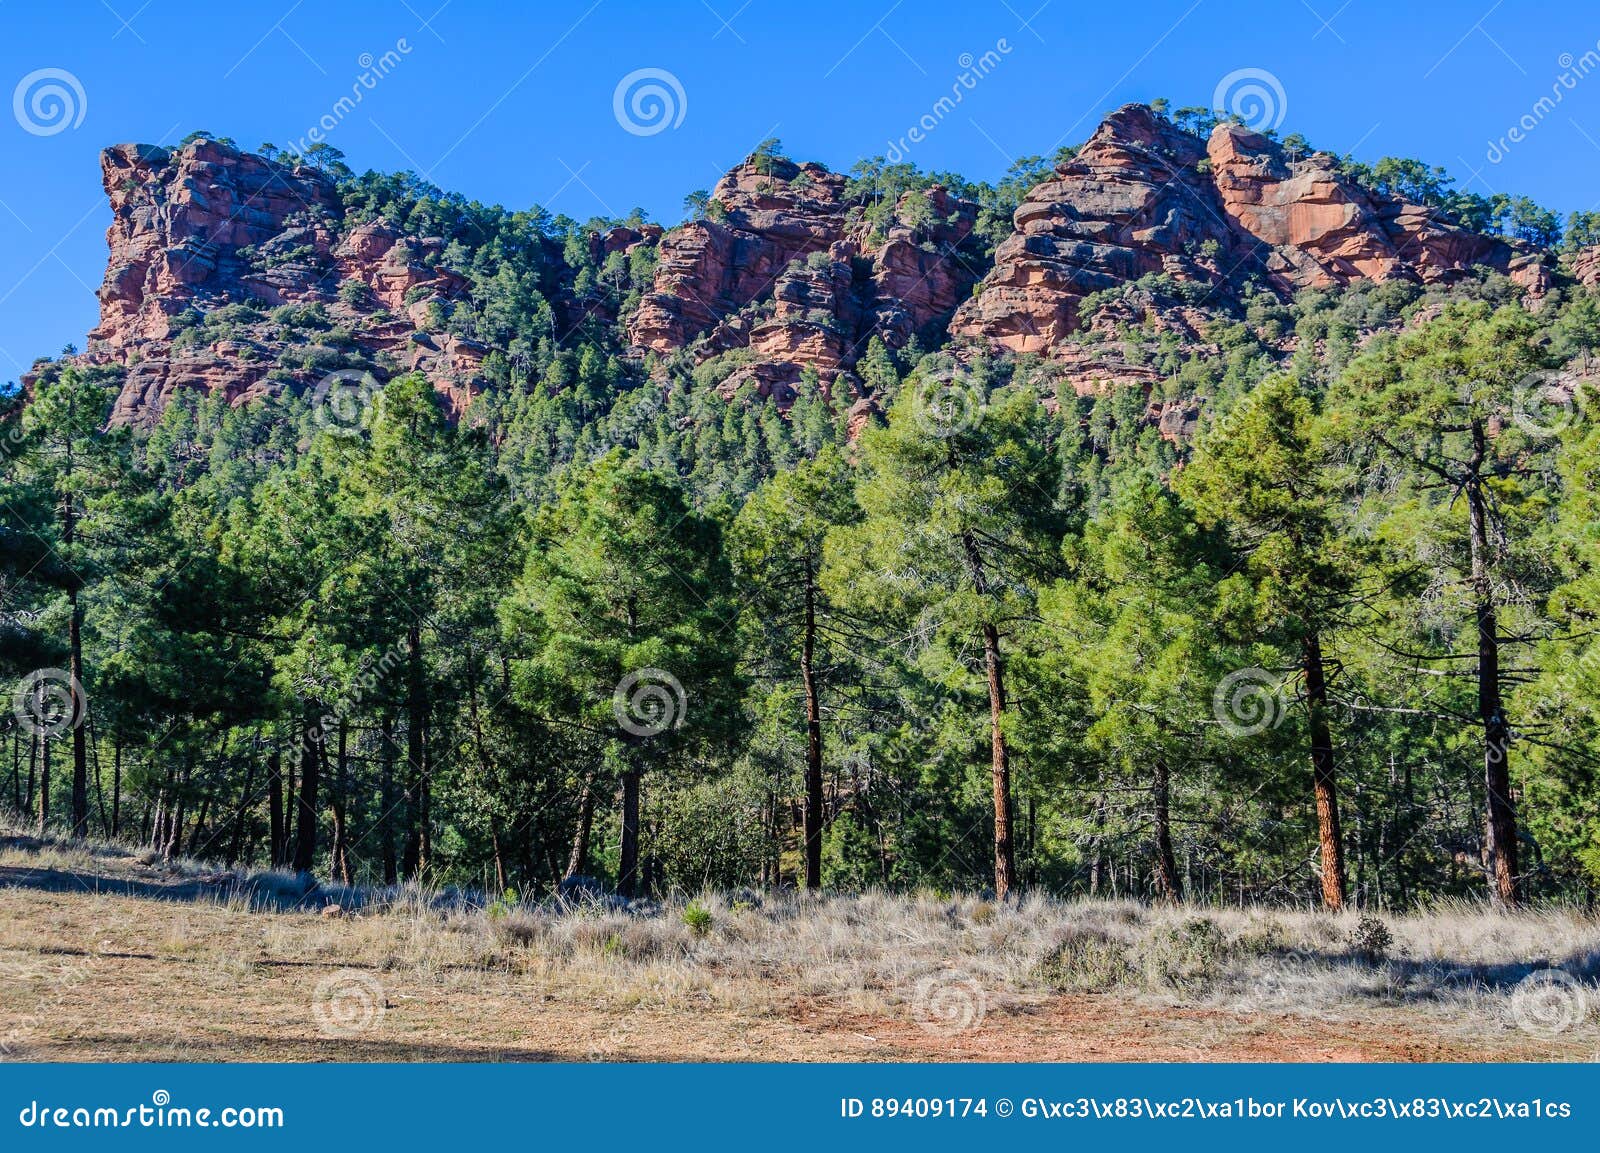 red boulders in pinares del rodeno natural park, spain